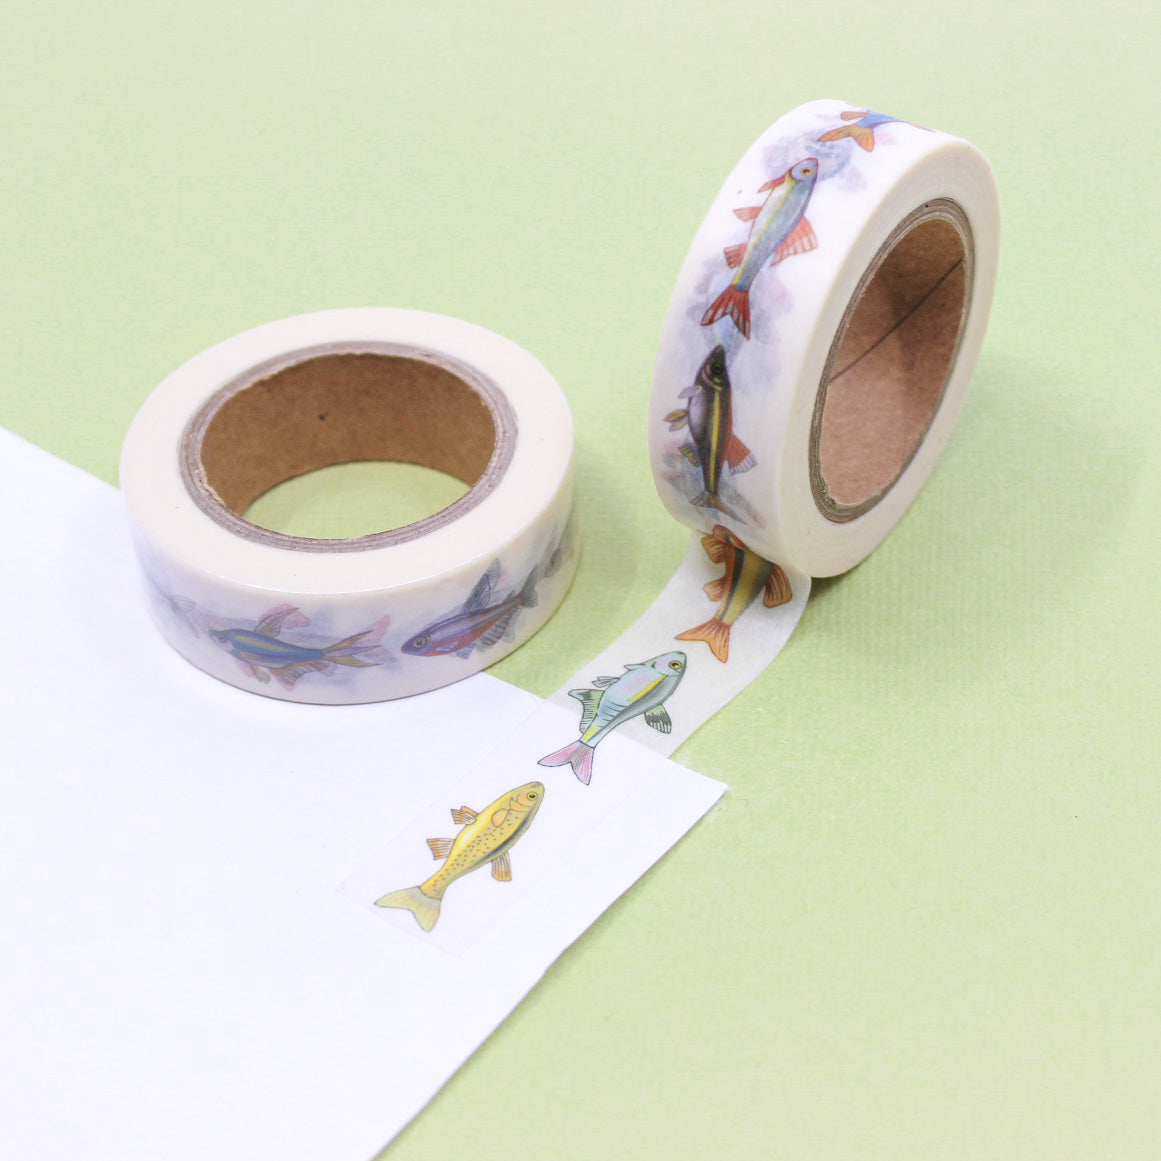 Reel in the fun with this bass fishing-themed washi tape! Featuring images of bass fish and fishing gear, this tape is perfect for adding a touch of outdoor adventure to your projects. Use it to decorate scrapbook pages, gift wrap, and more for the fishing enthusiast in your life! This tape is sold at BBB Supplies Craft Shop.